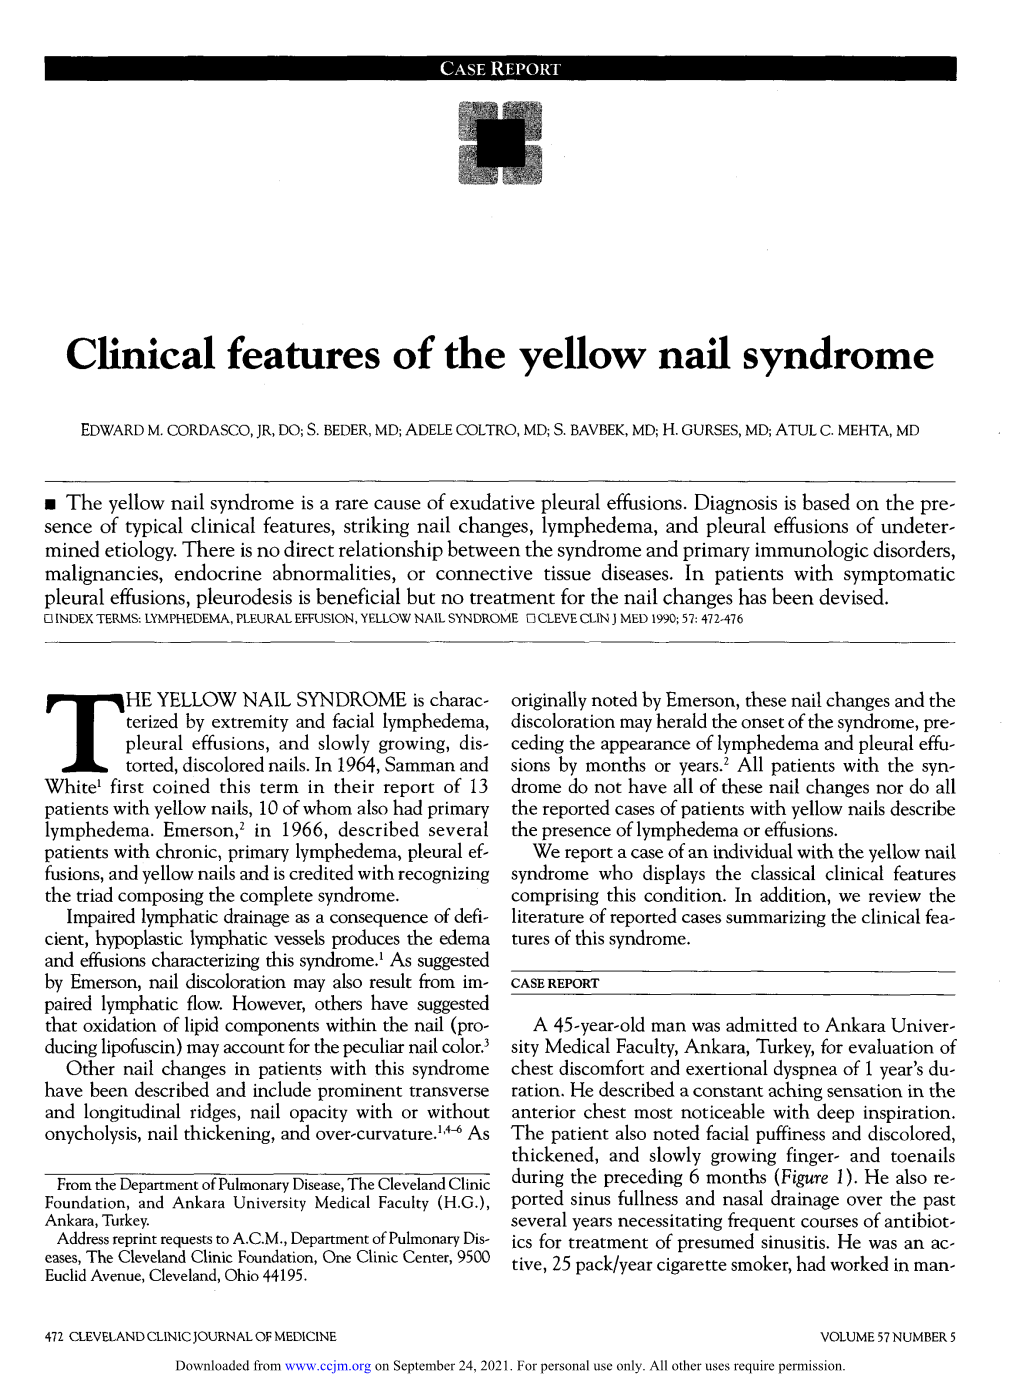 Clinical Features of the Yellow Nail Syndrome